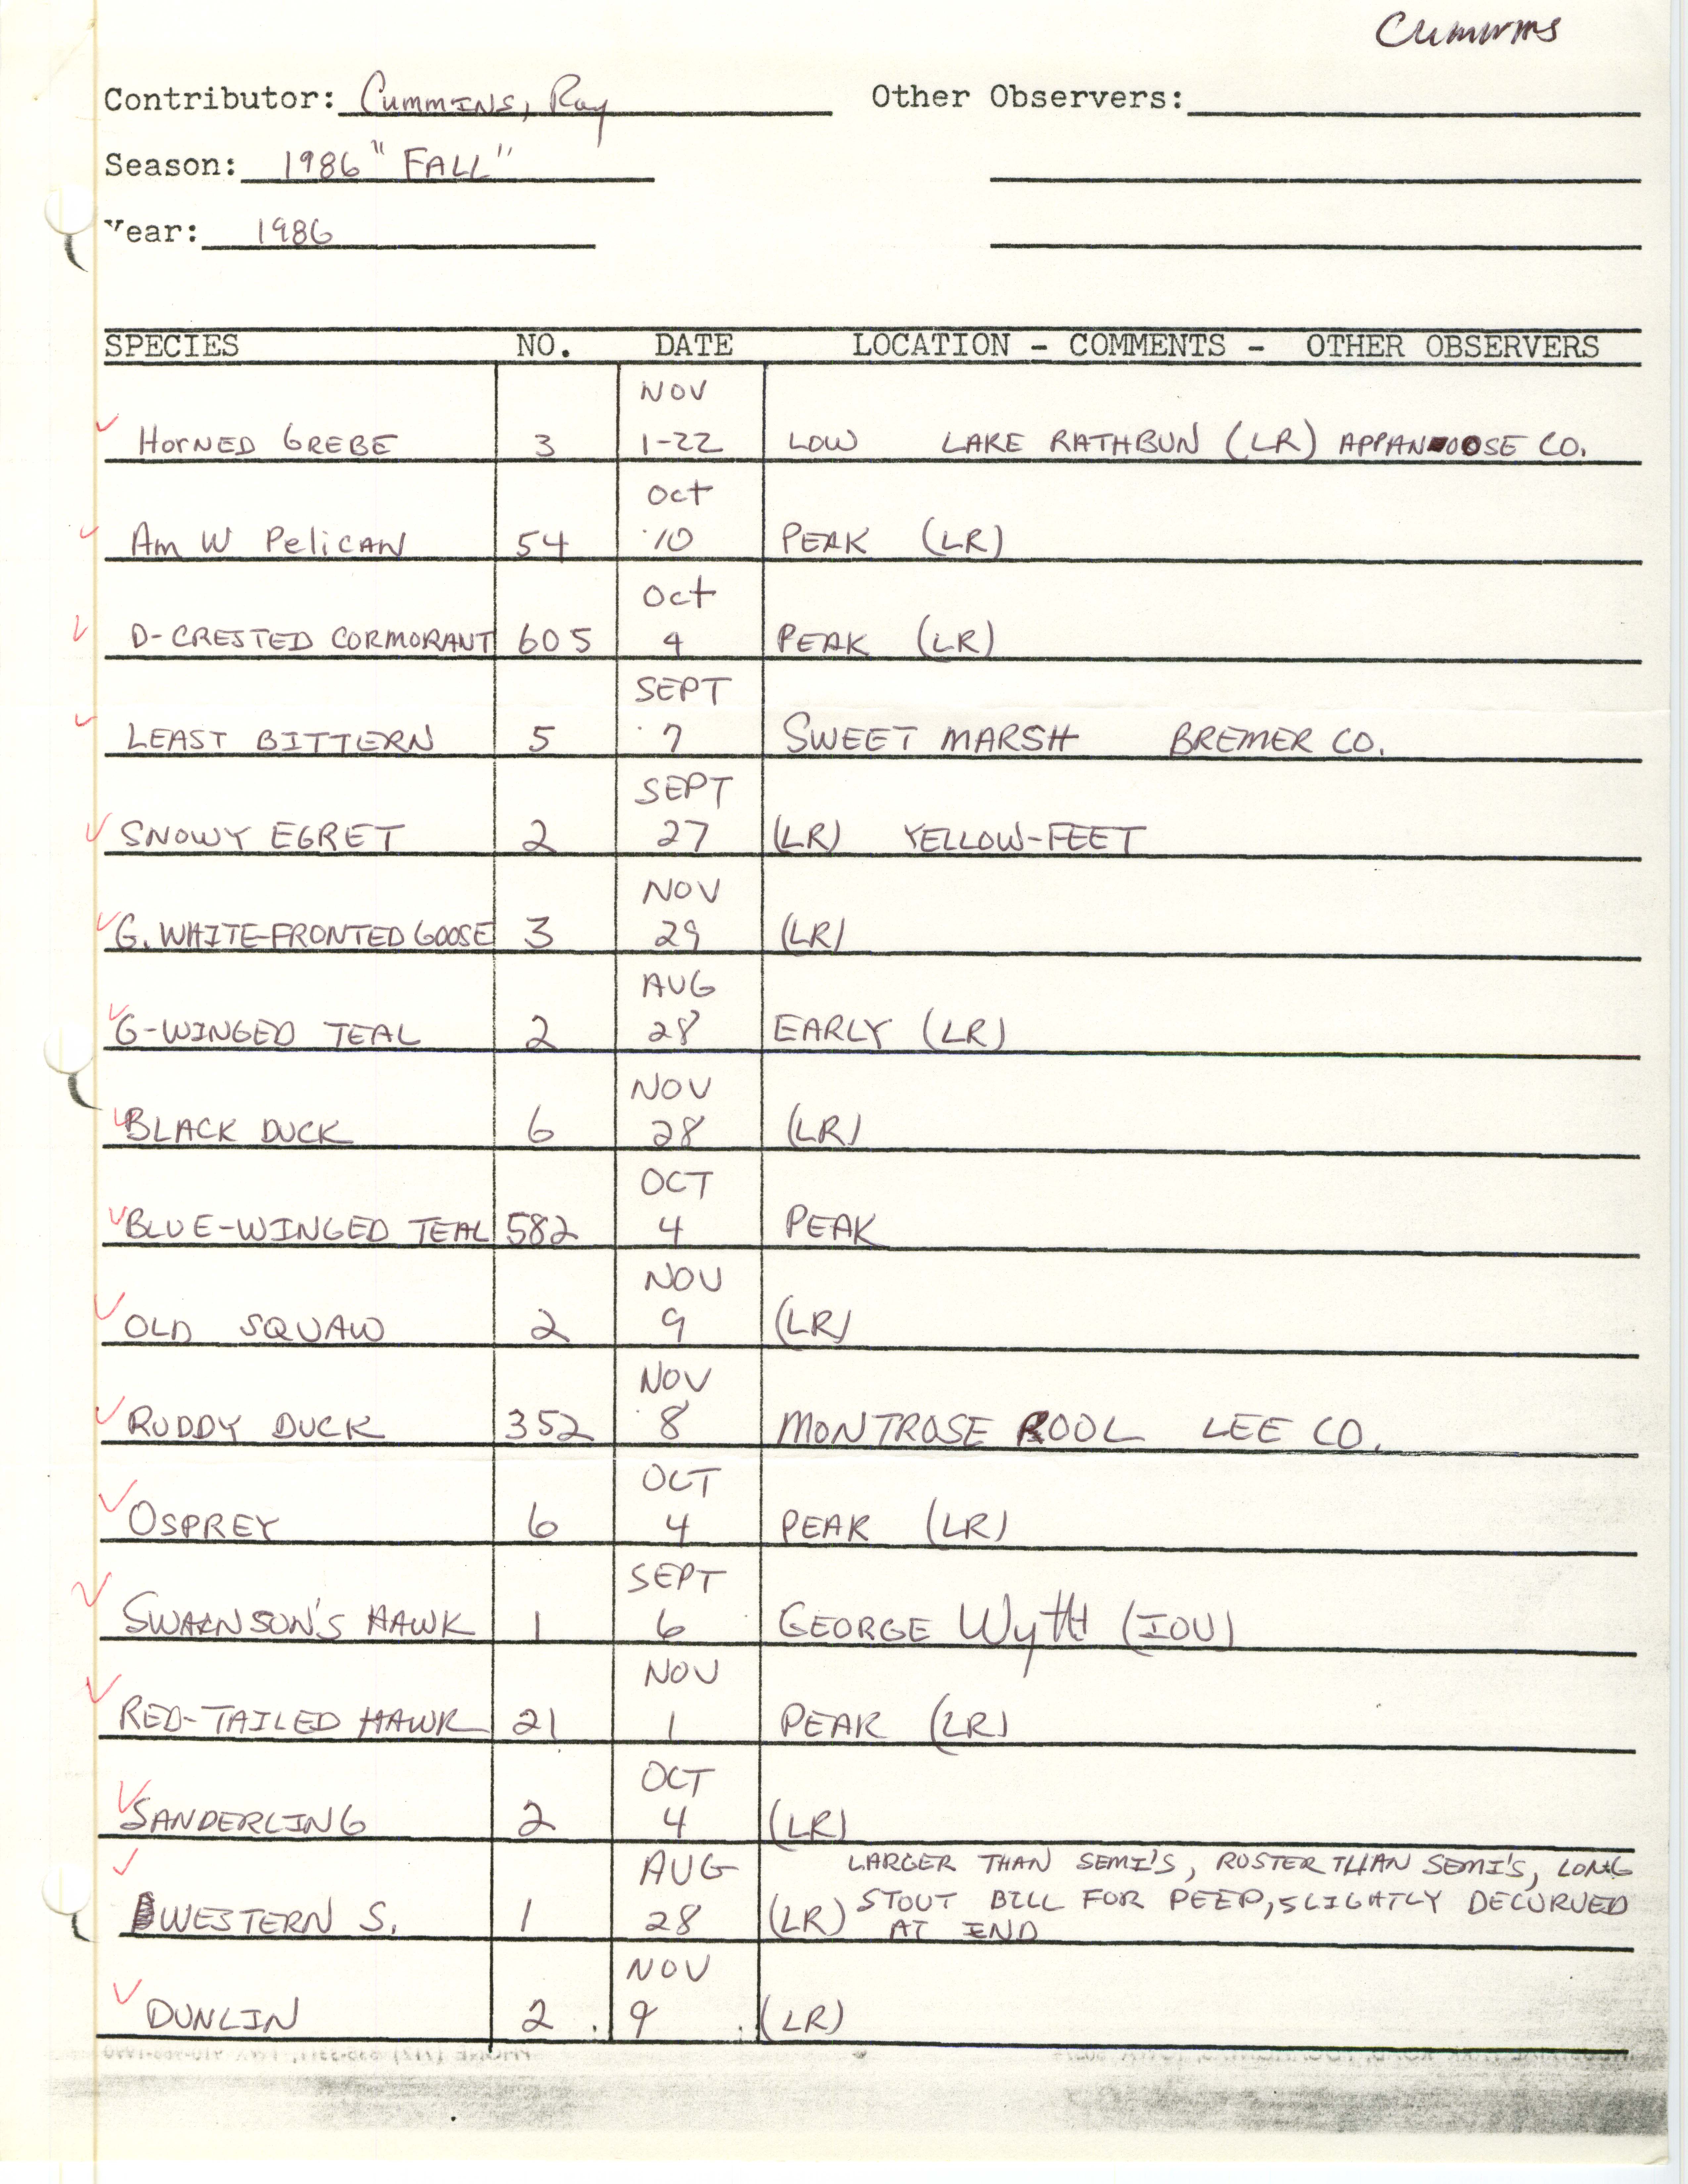 Field notes contributed by Raymond L. Cummins, fall 1986